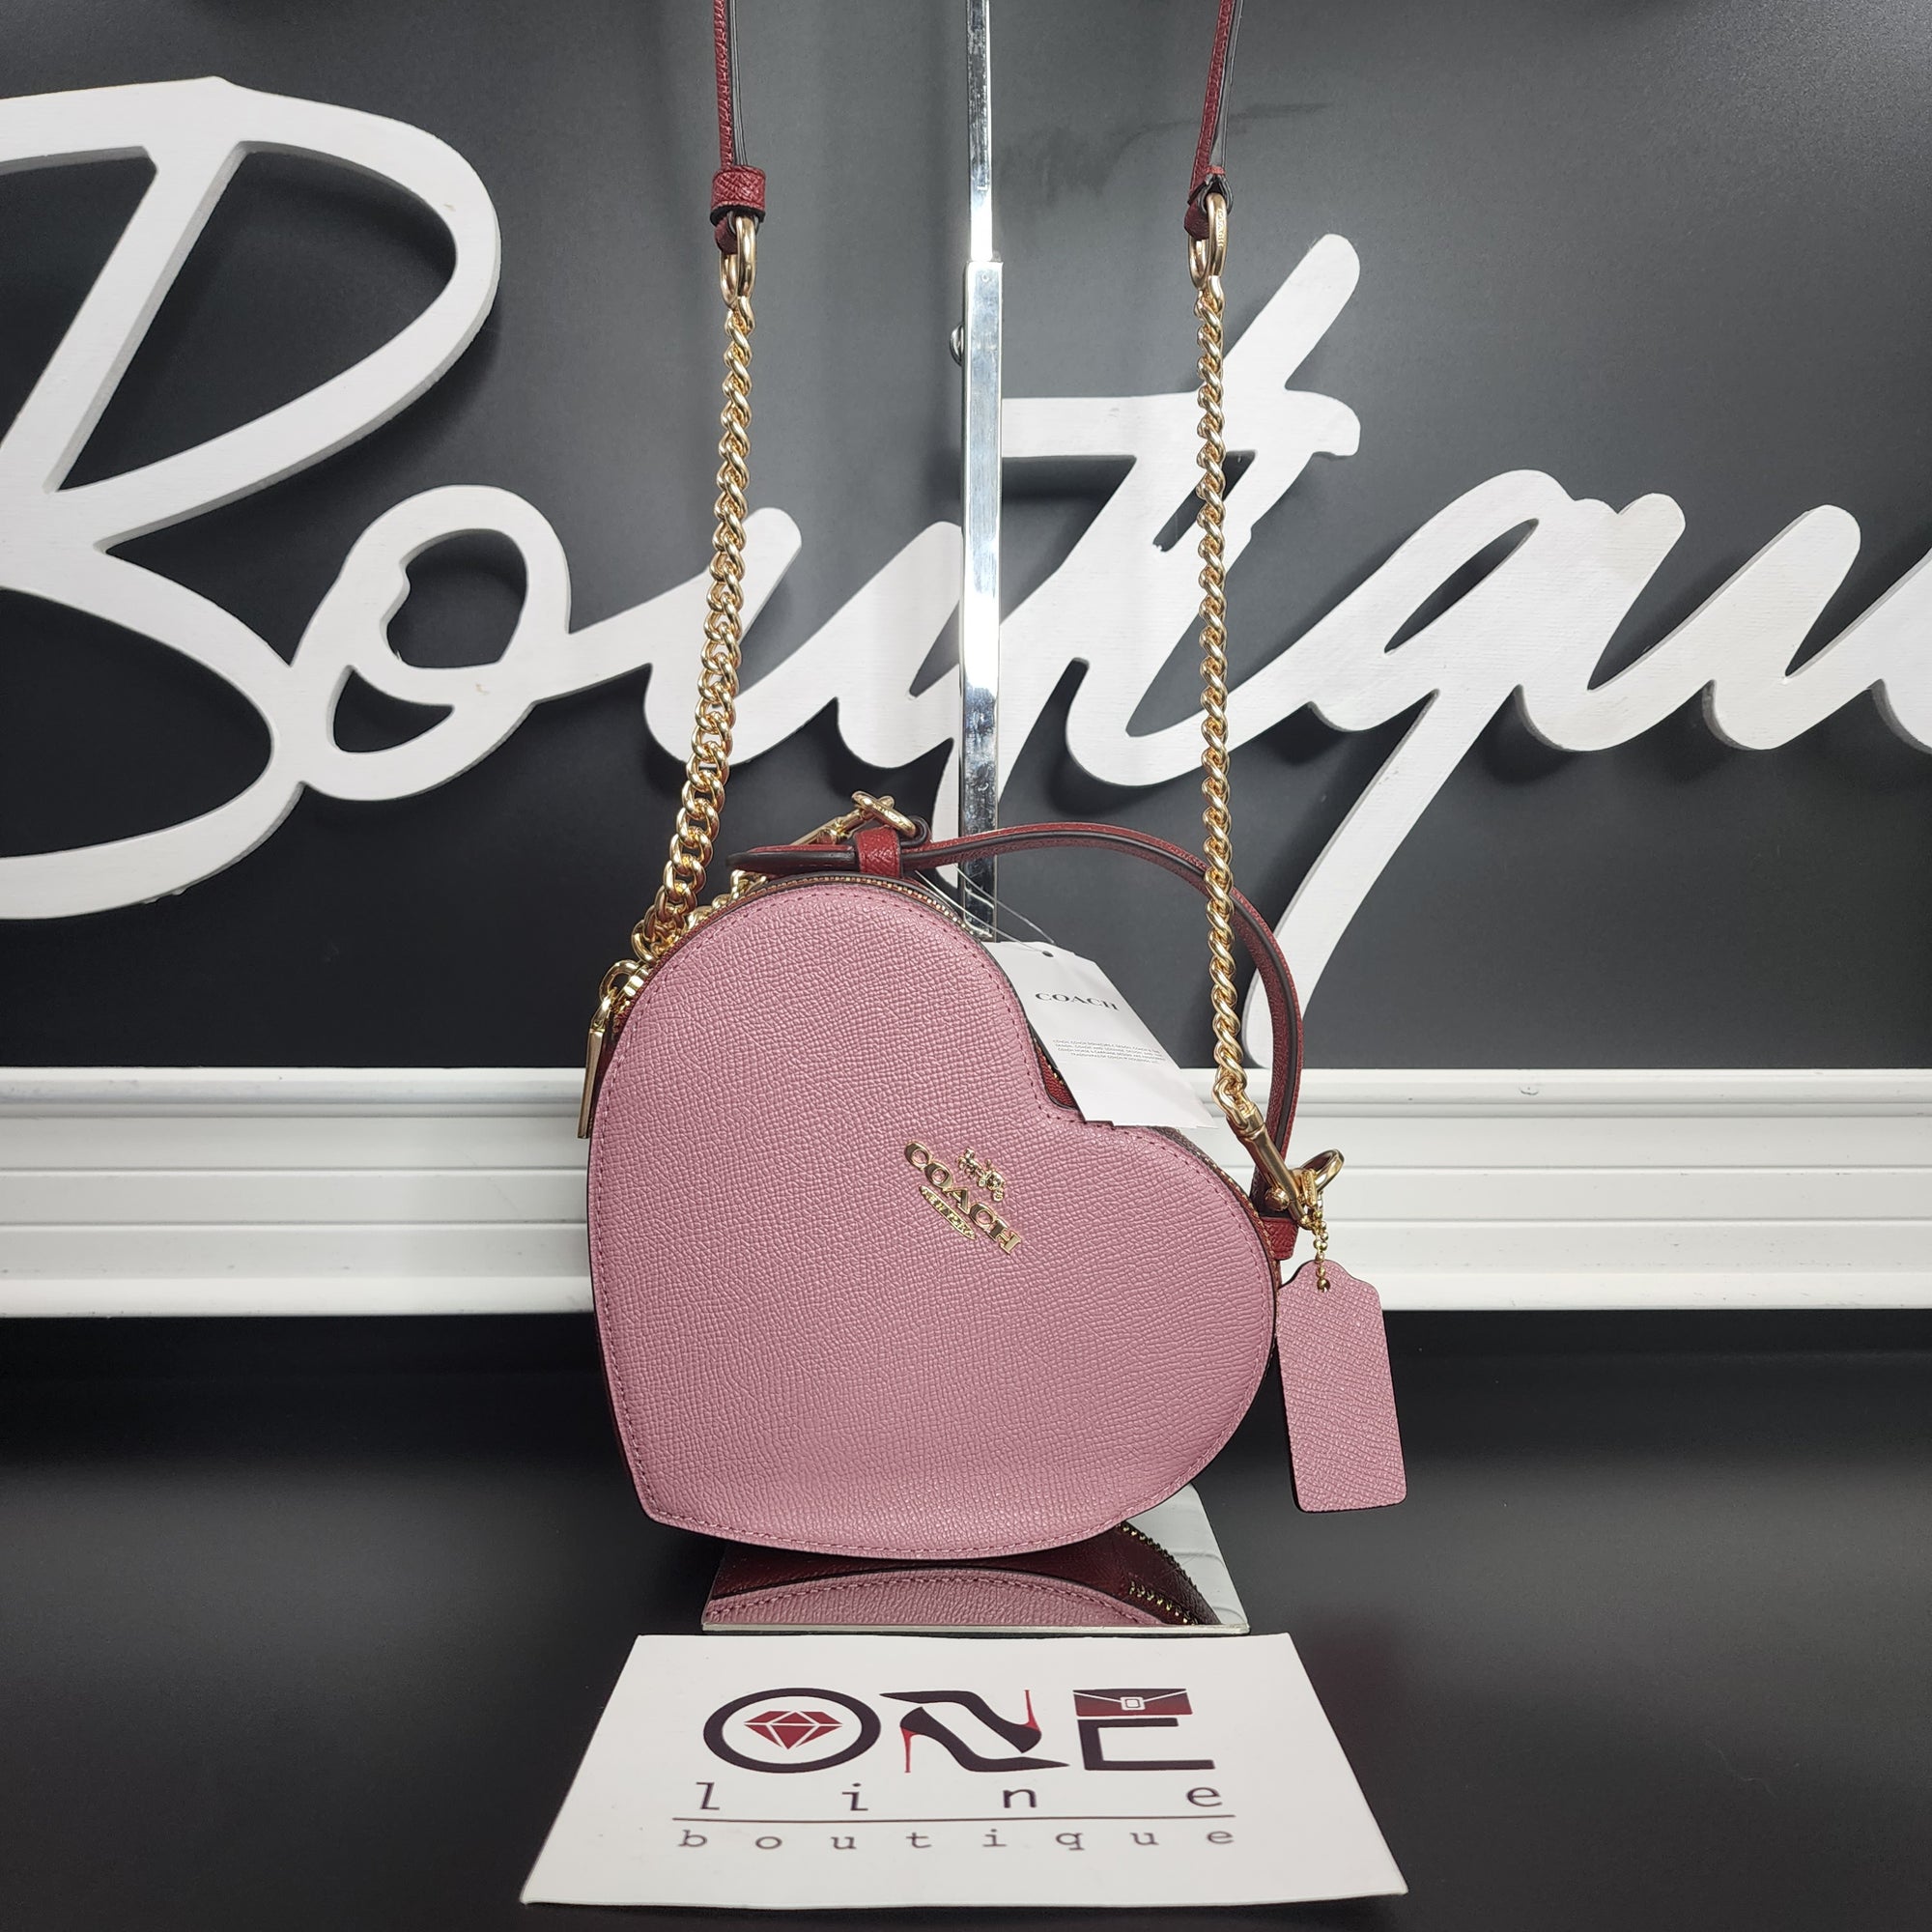 NEW Coach heart bag limited edition - OneLine Boutique